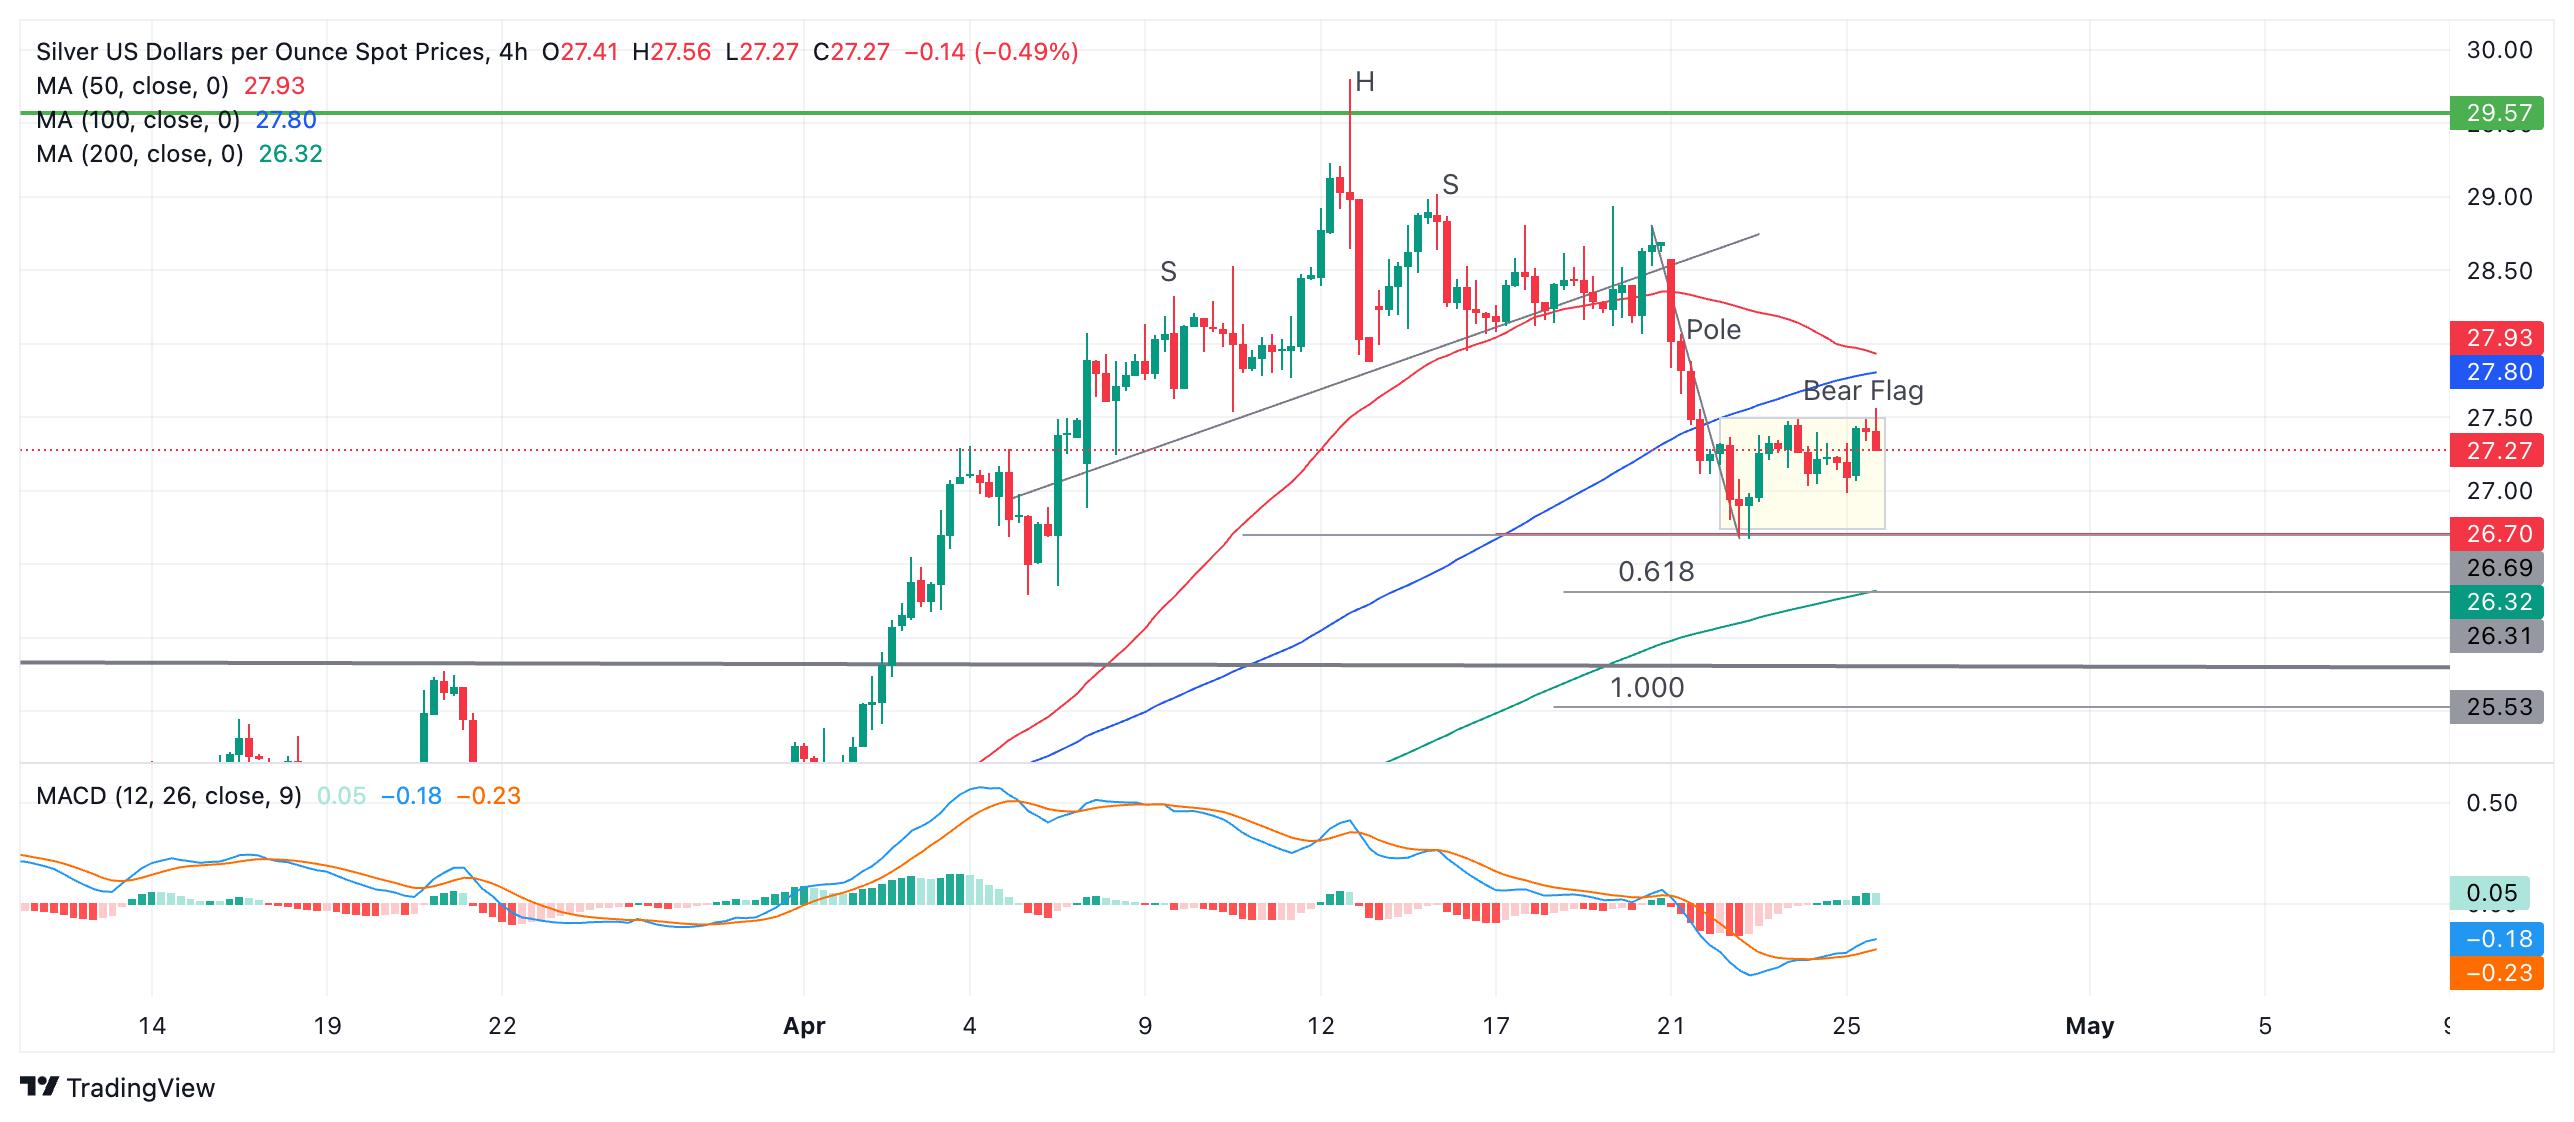 Silver Price Analysis: Silver price could be forming a Bear Flag price pattern